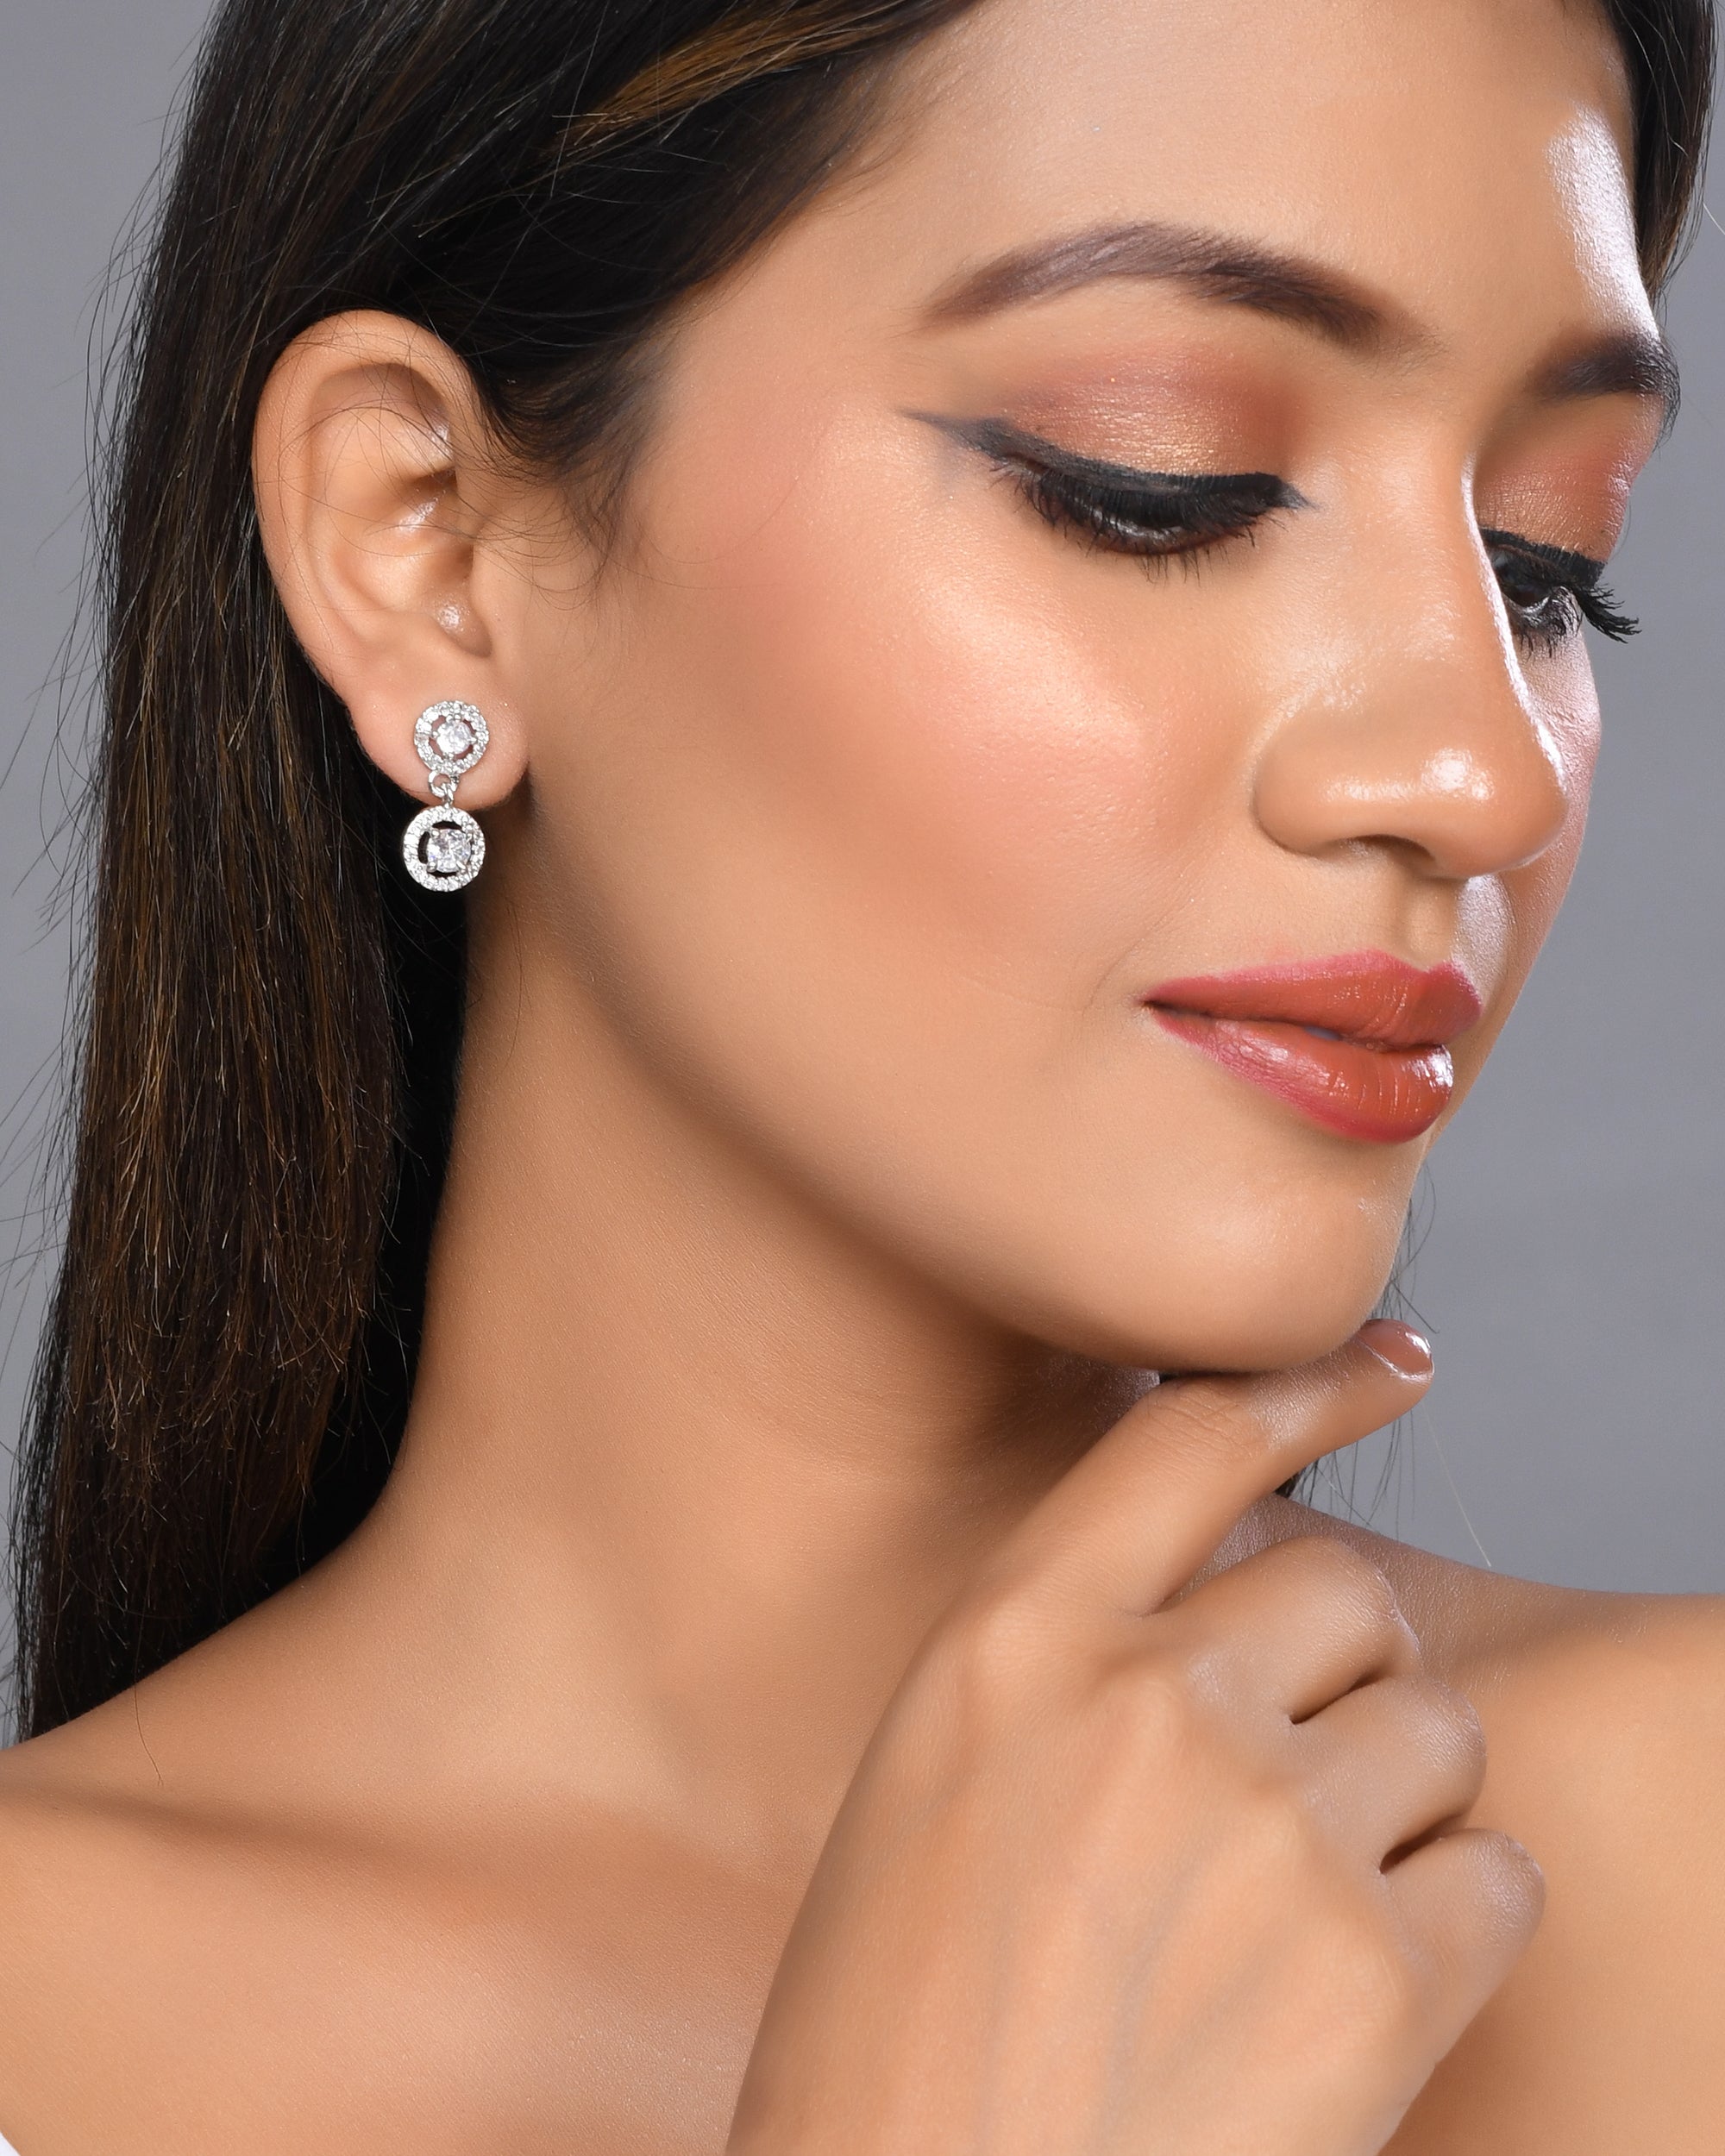 Flipkart.com - Buy radhee imitation New ad diamond rose gold premium  quality layer earrings Brass Earring Set, Plug Earring Online at Best  Prices in India